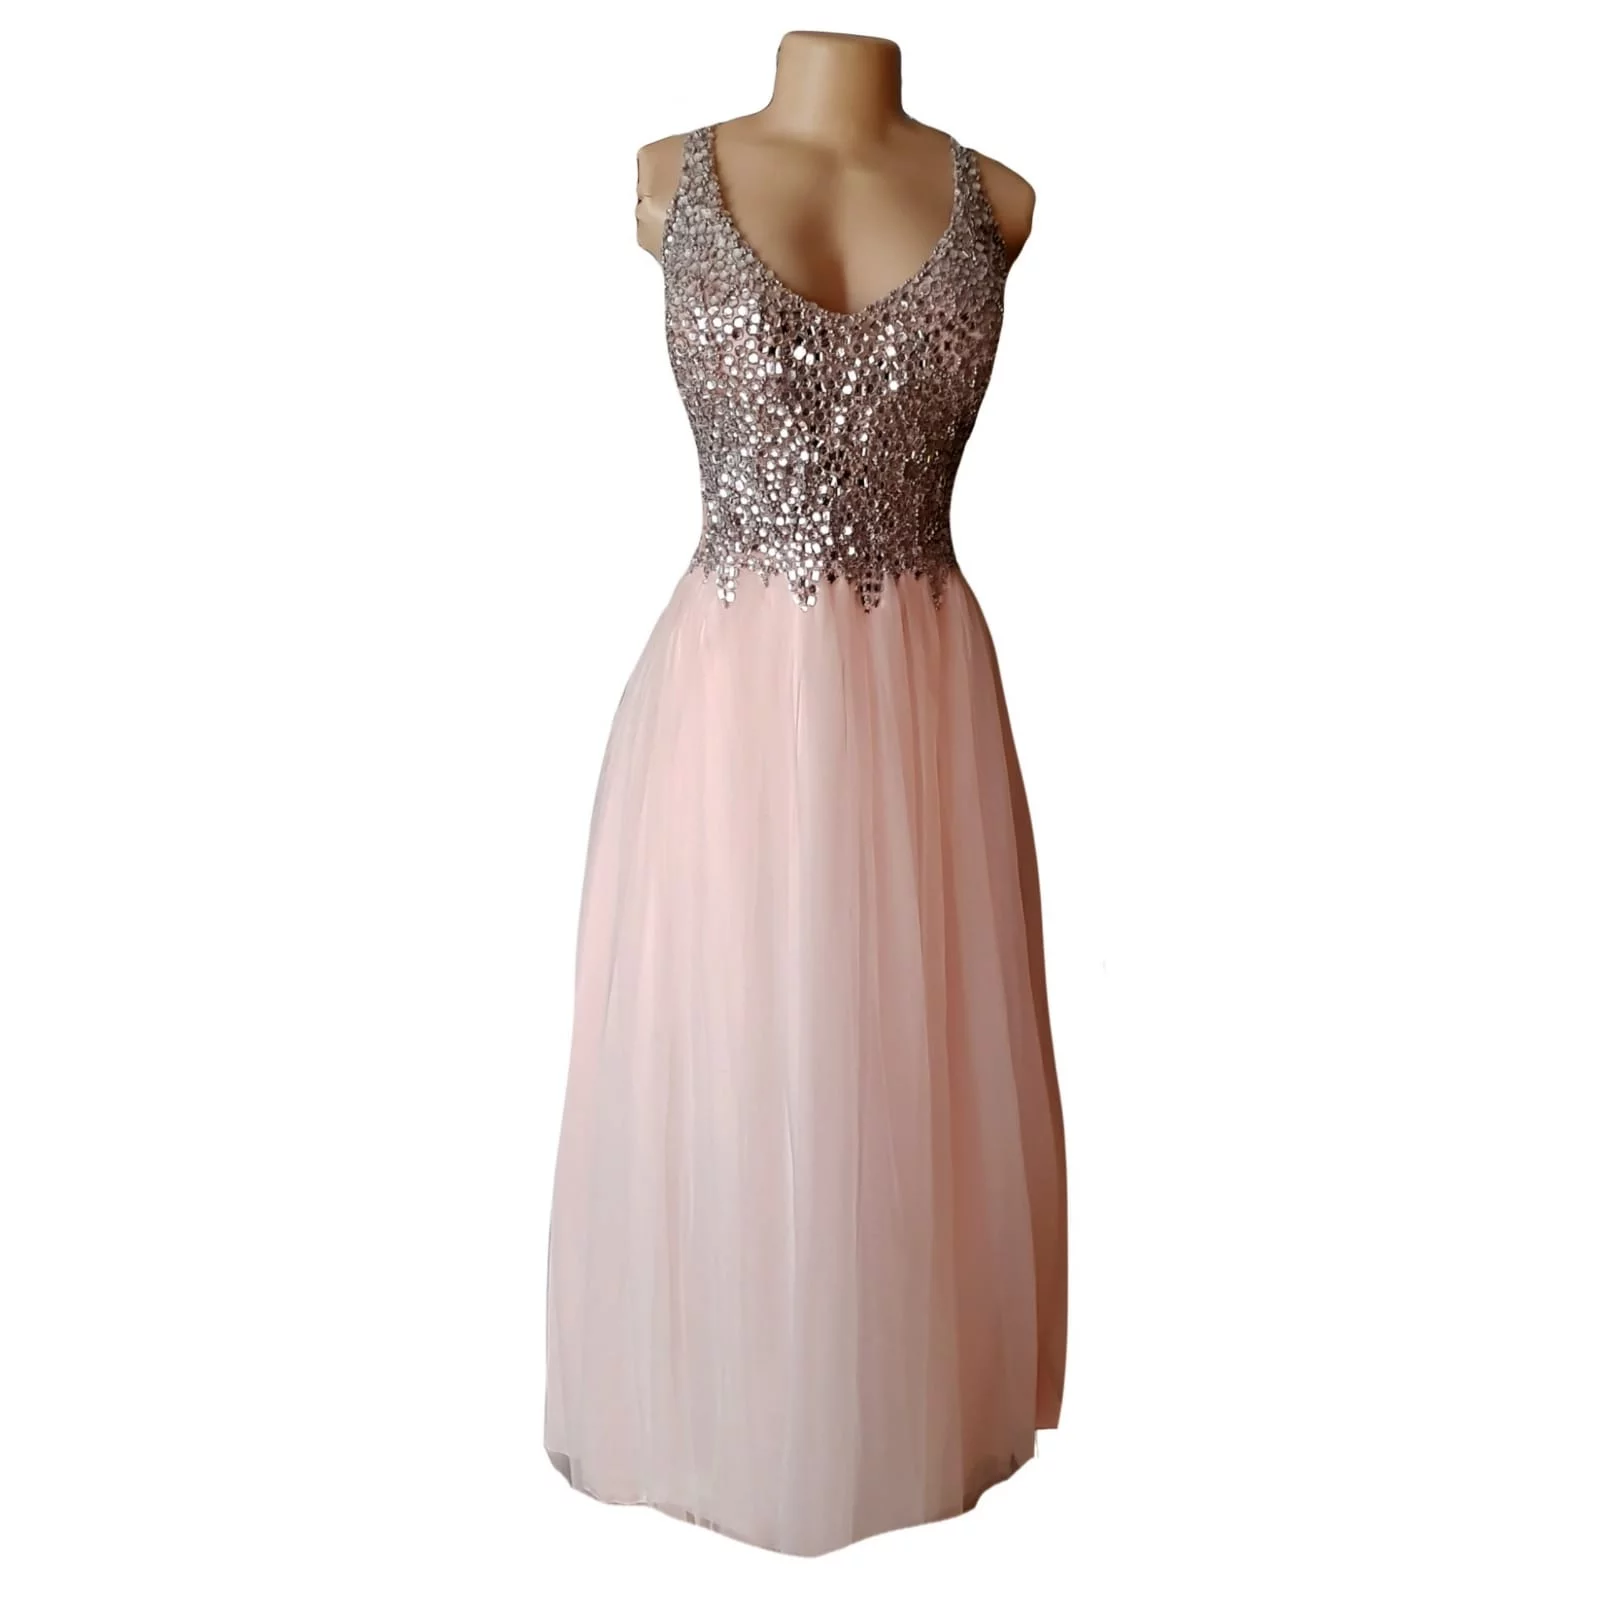 Pink nude and silver long plus size prom dress 5 pink nude and silver long plus size prom dress with a beaded bodice and a lace up back and a tulle bottom.